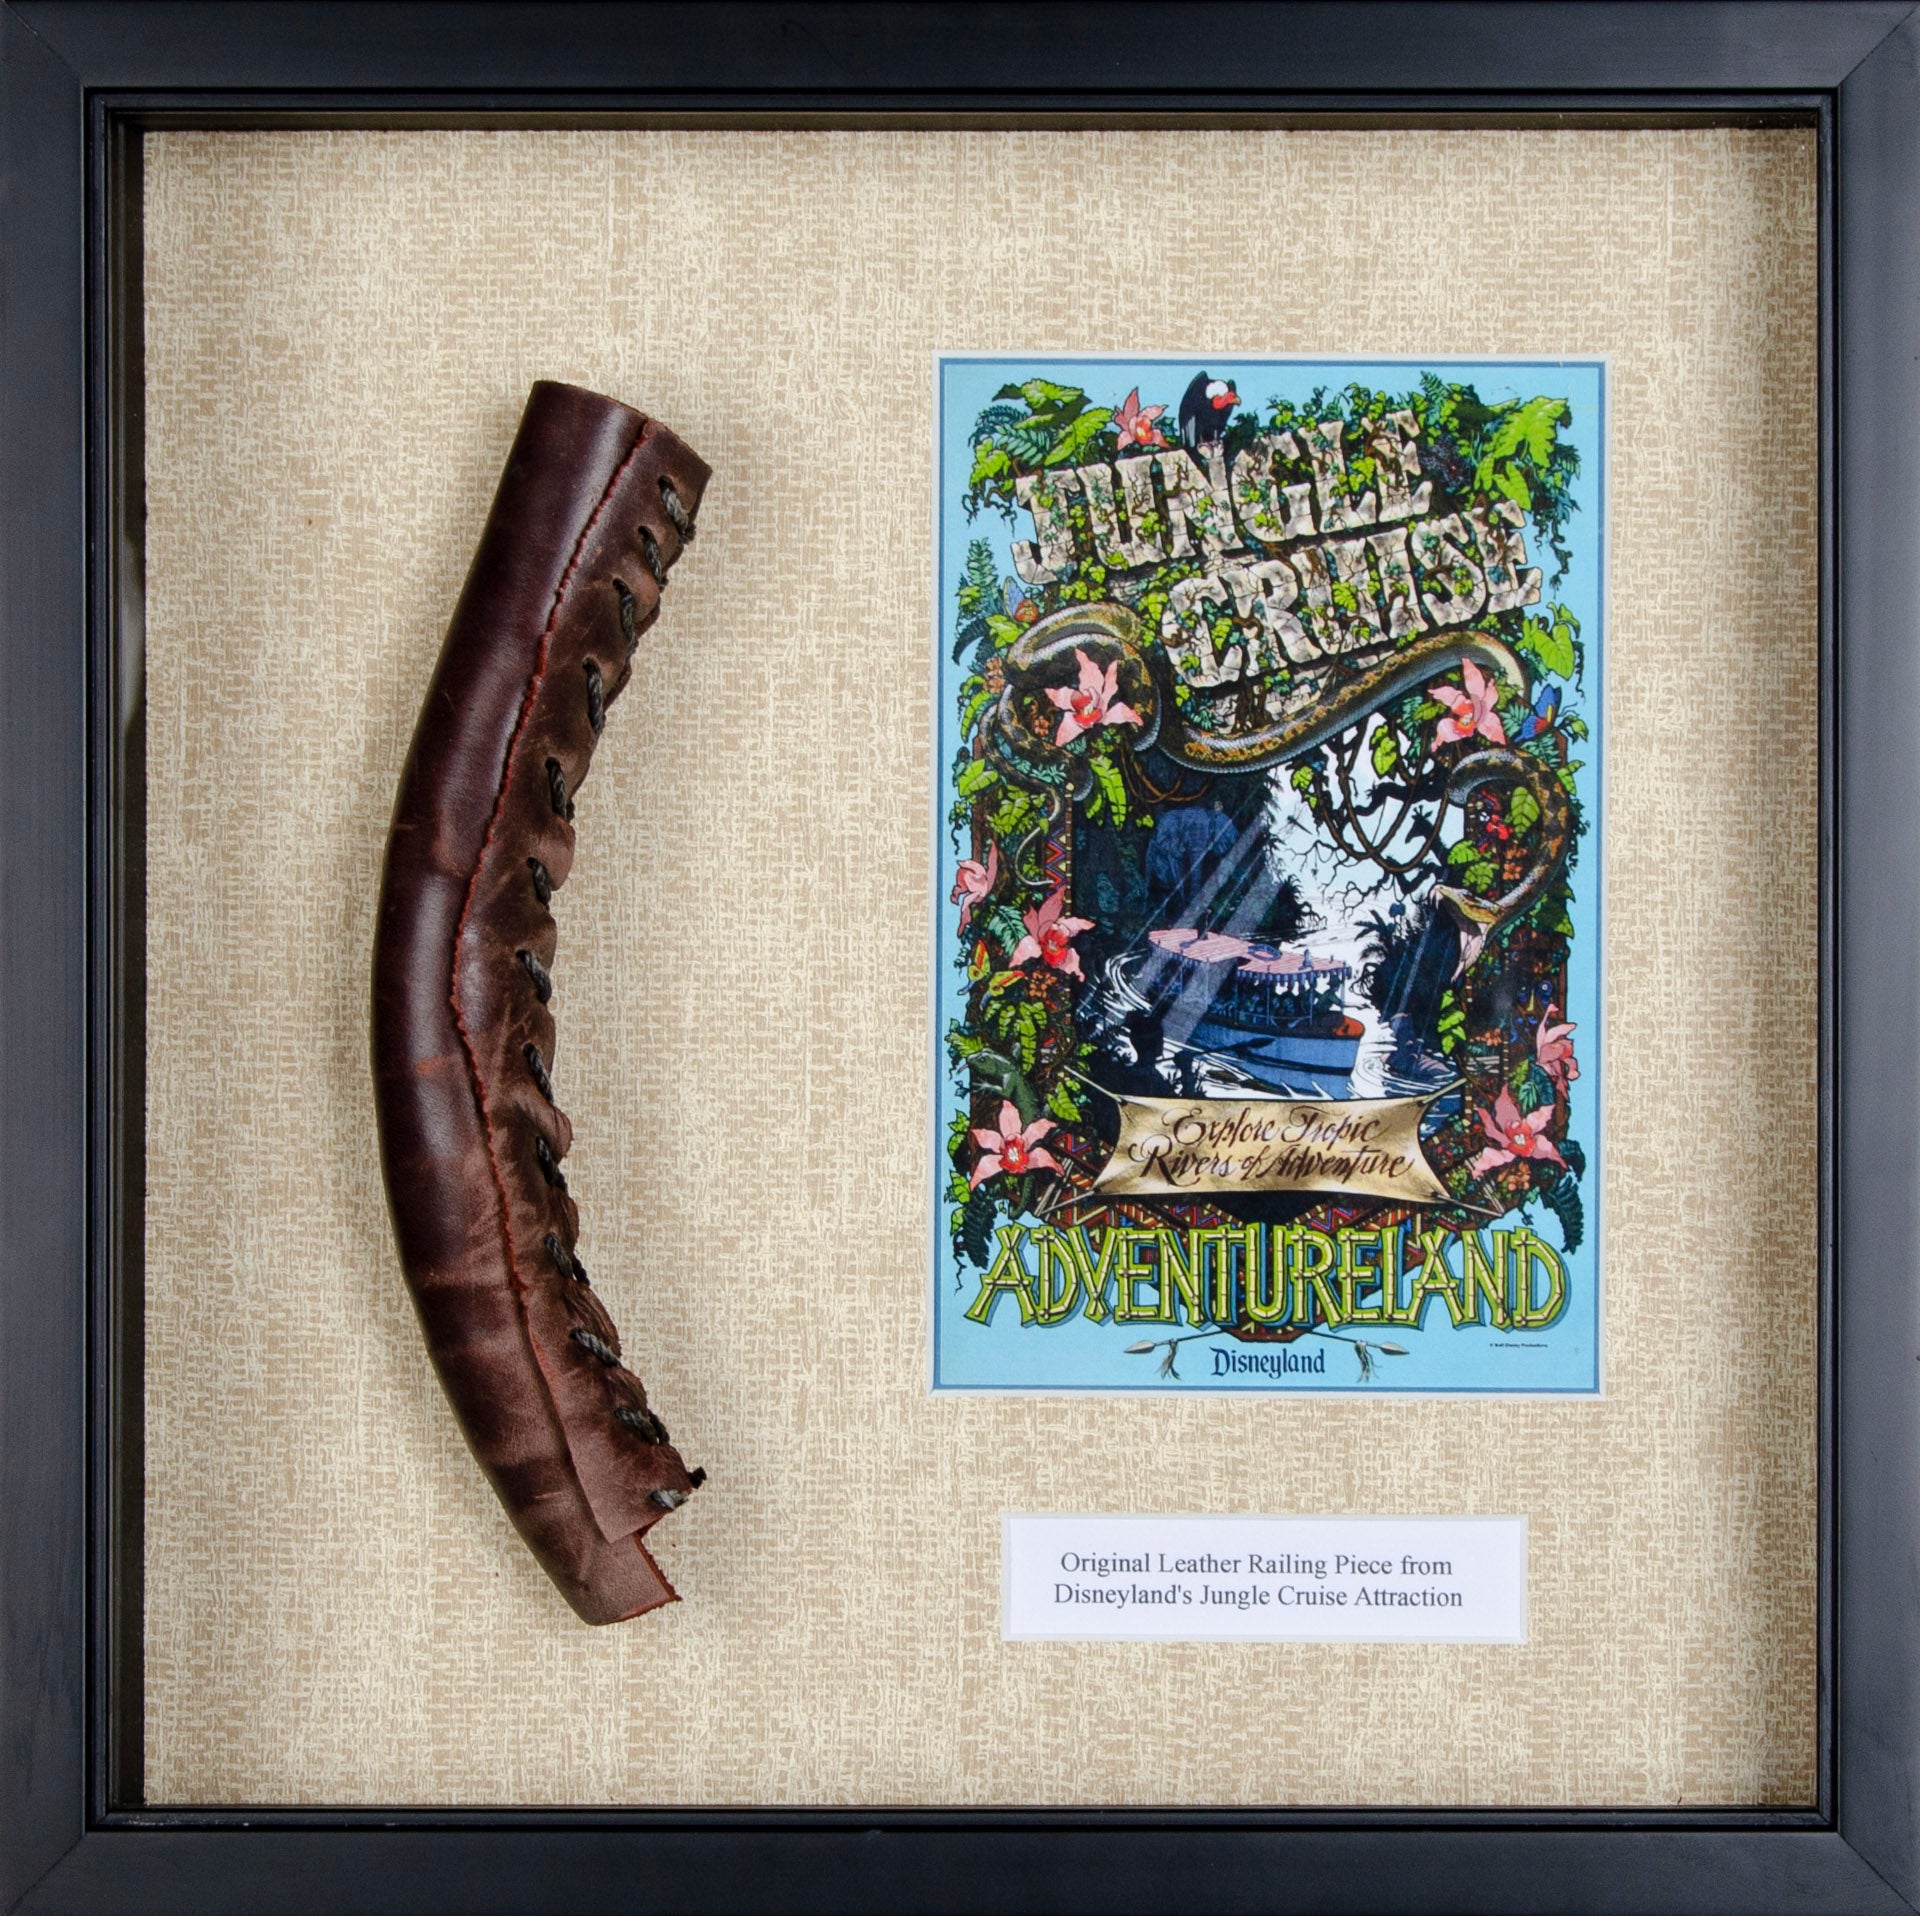 Original Leather Railing Piece from Disneyland's Jungle Cruise Attraction